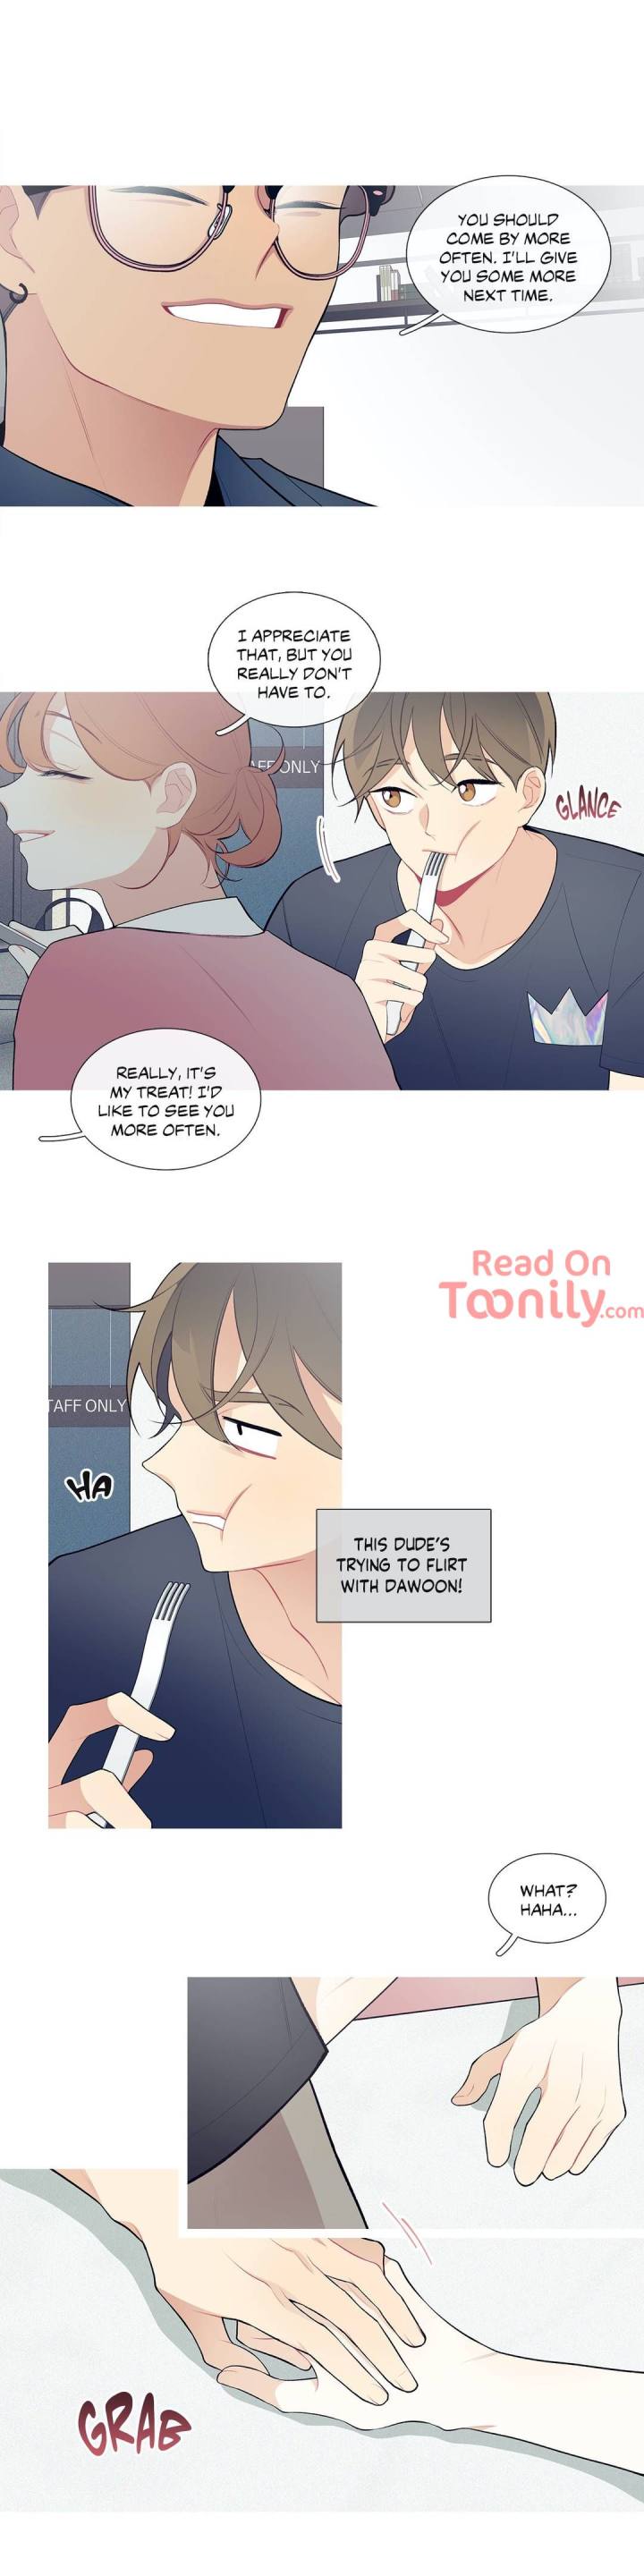 What’s Going On? - Chapter 21 Page 8